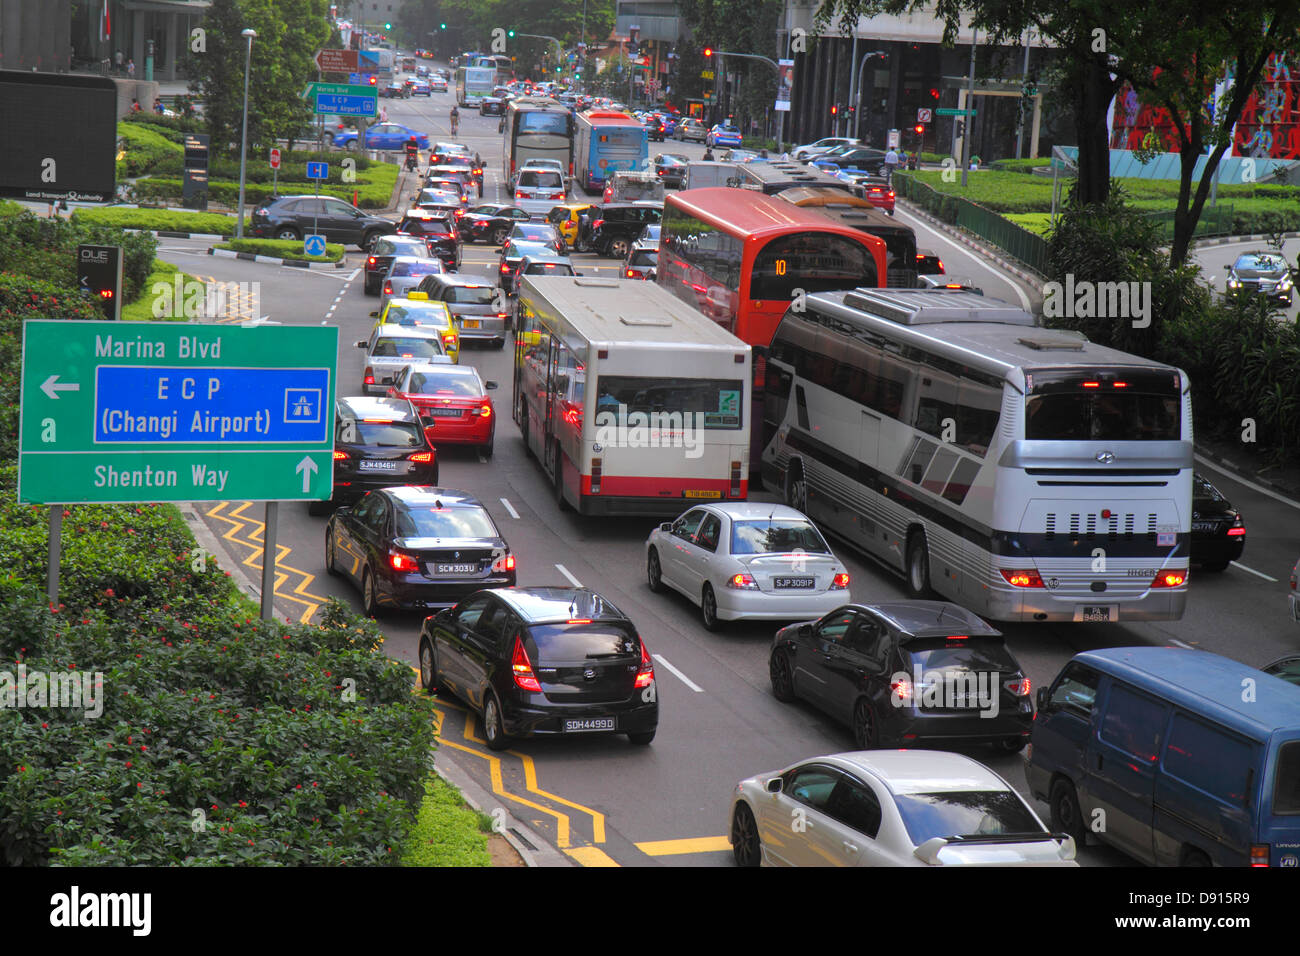 Singapore Collyer Quay,traffic,cars,automobiles,buses,coaches,downtown,Sing130201222 Stock Photo